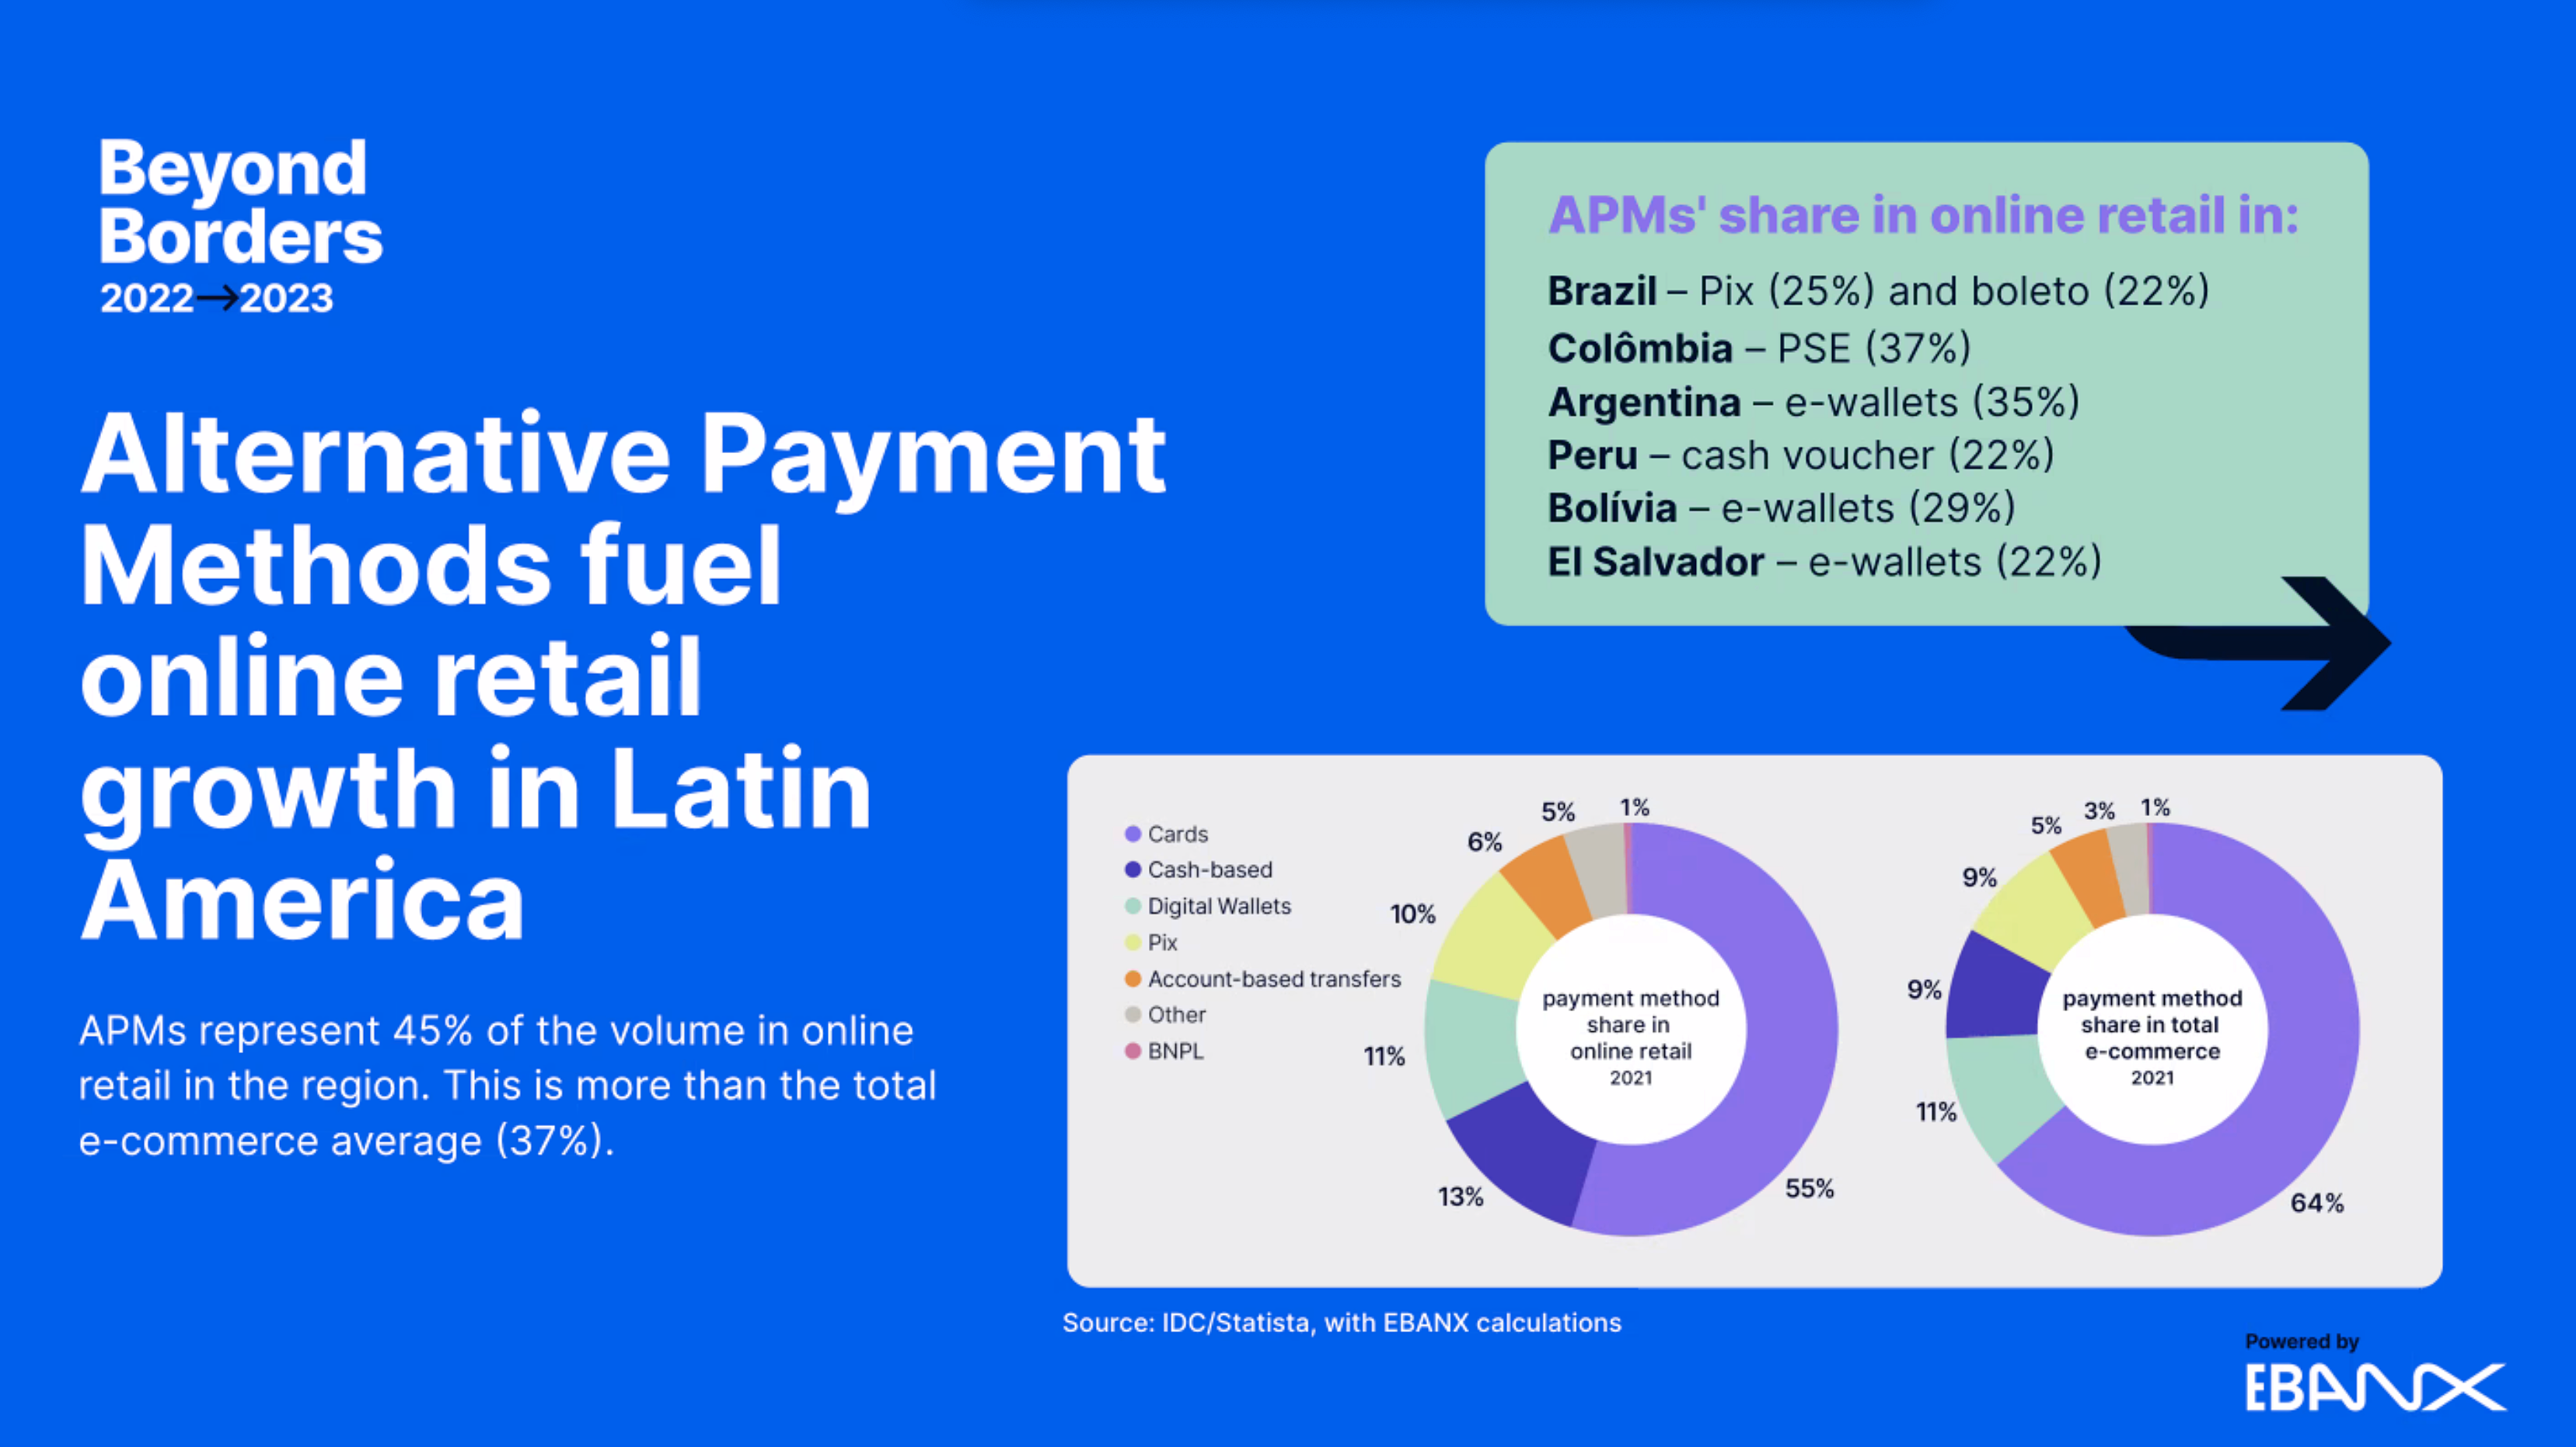 Alternative payment methods (APMs) fuel online retail growth in Latin America